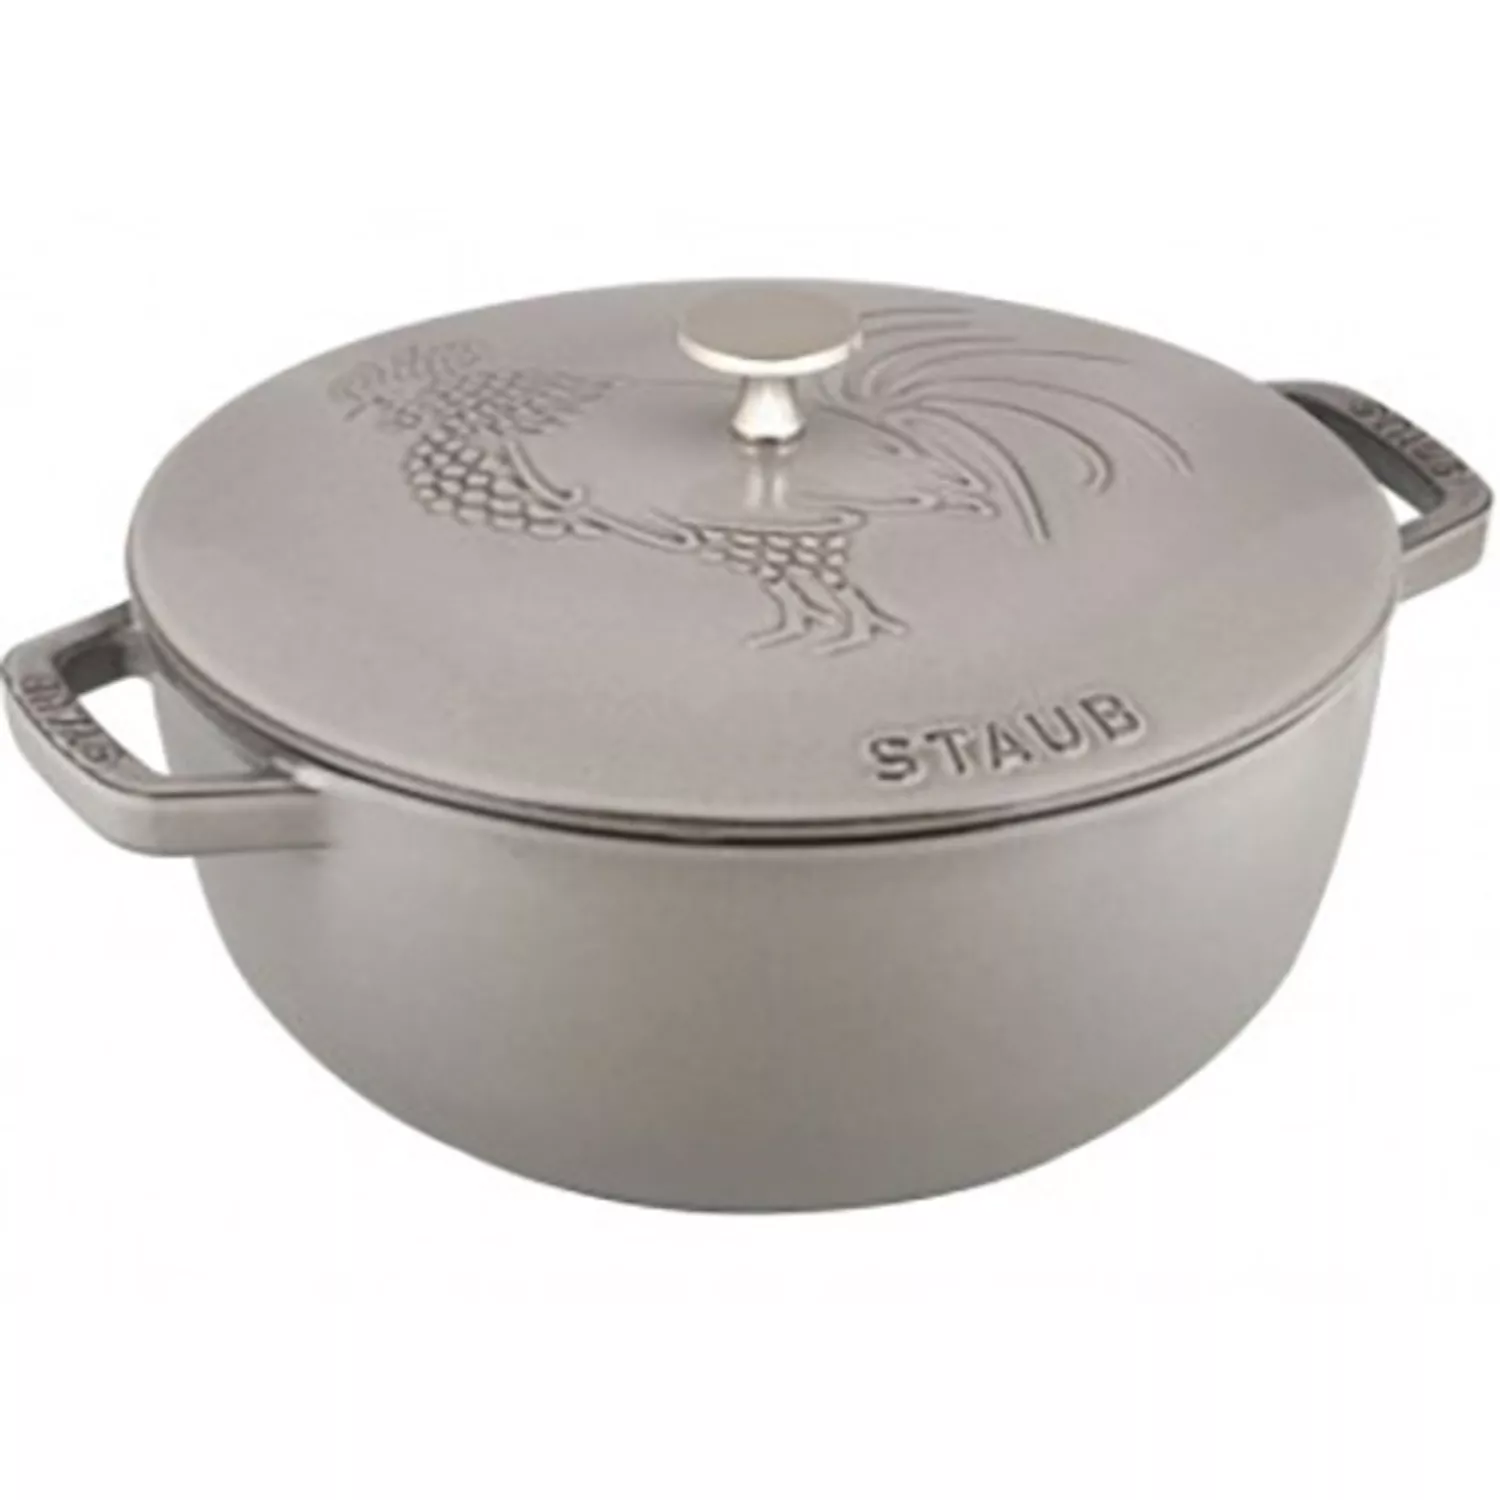 Photos - Terrine / Cauldron Staub Essential French Oven with Rooster Lid 11752418 